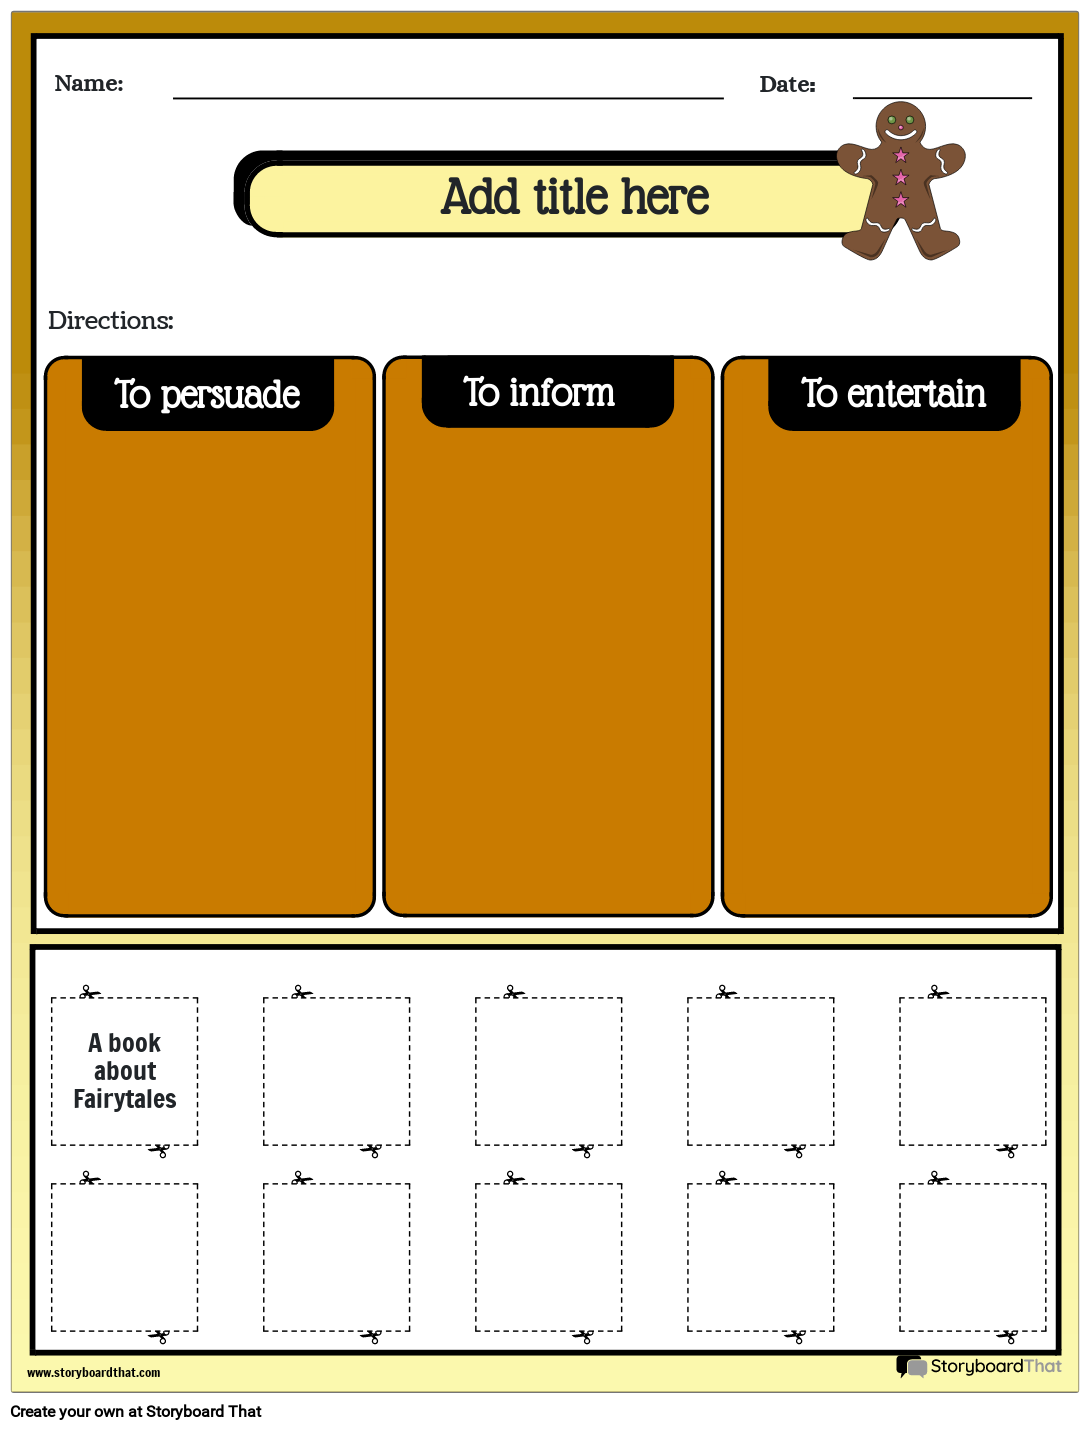 Cut-out - Author's Purpose Worksheet